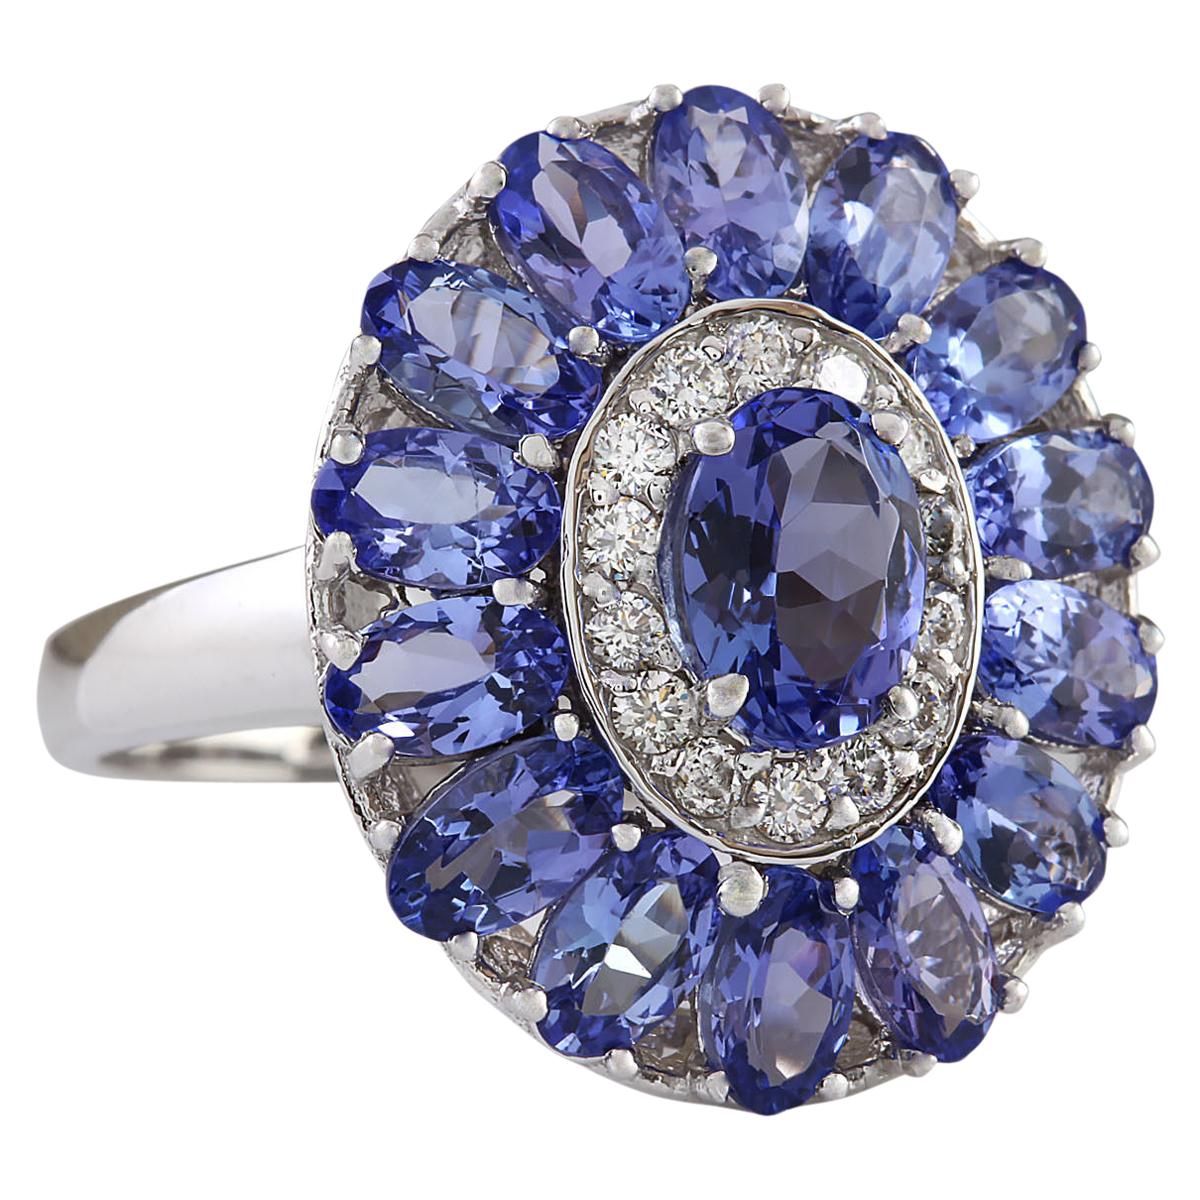 Stamped: 14K White Gold
Total Ring Weight: 5.8 Grams
Total Natural Tanzanite Weight is 4.42 Carat
Color: Blue
Diamond Weight: Total Natural Diamond Weight is 0.35 Carat
Color: F-G, Clarity: VS2-SI1
Face Measures: 20.35x17.40 mm
Sku: [703911W]